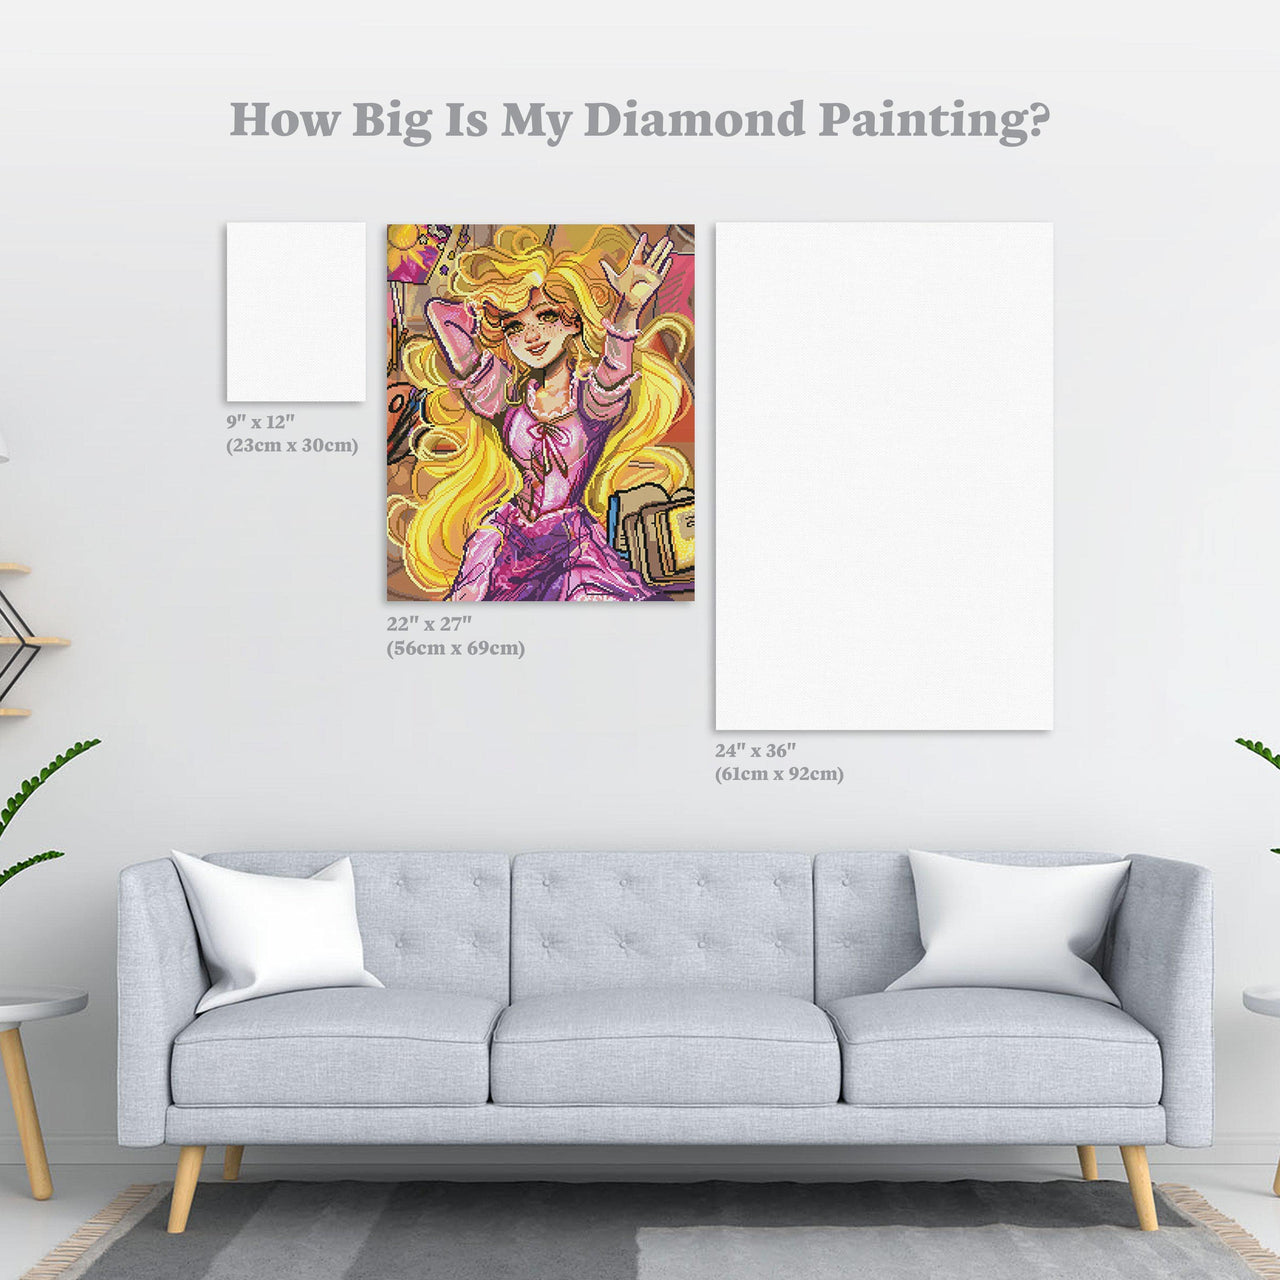 Diamond Painting Time to Spare 22" x 27″ (56cm x 69cm) / Round with 56 Colors including 2 ABs / 48,555